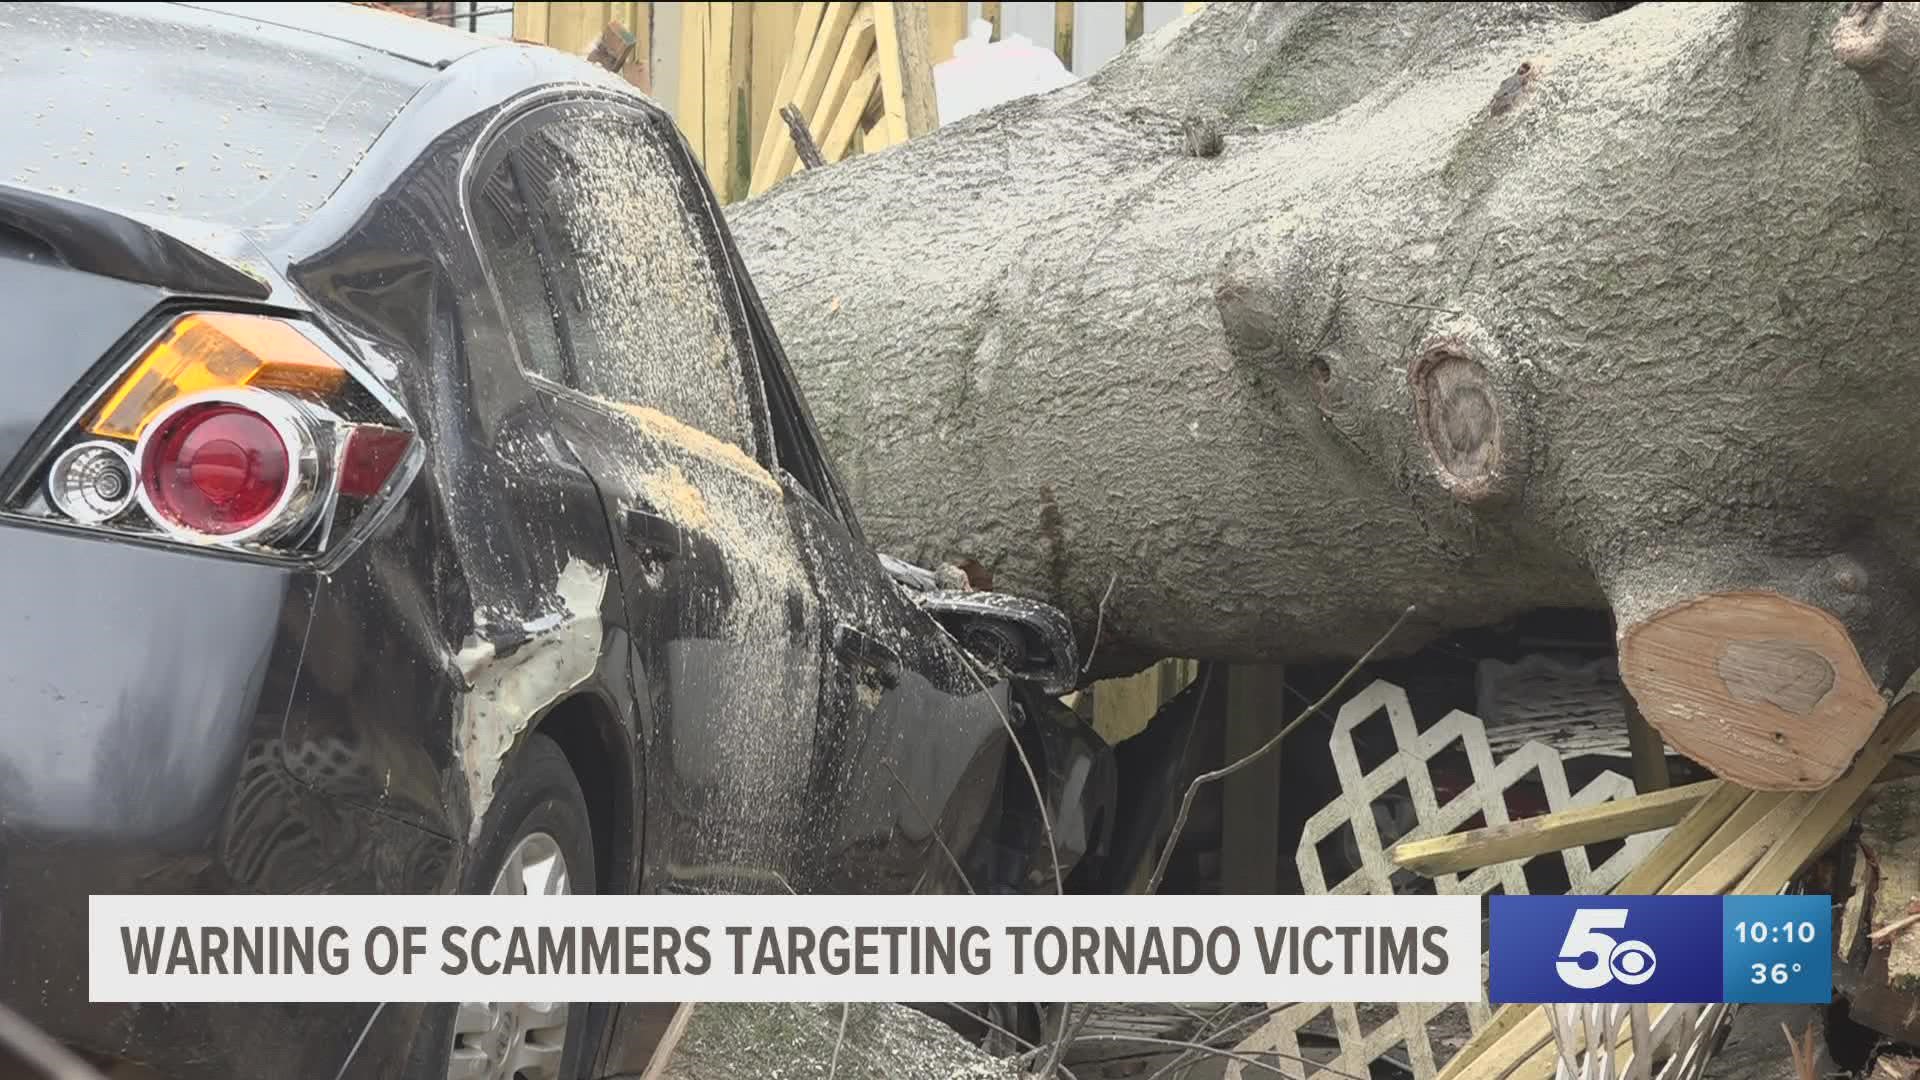 5NEWS Anchor with Cara Carlin with the Better Business Bureau about how to avoid scams following severe weather.